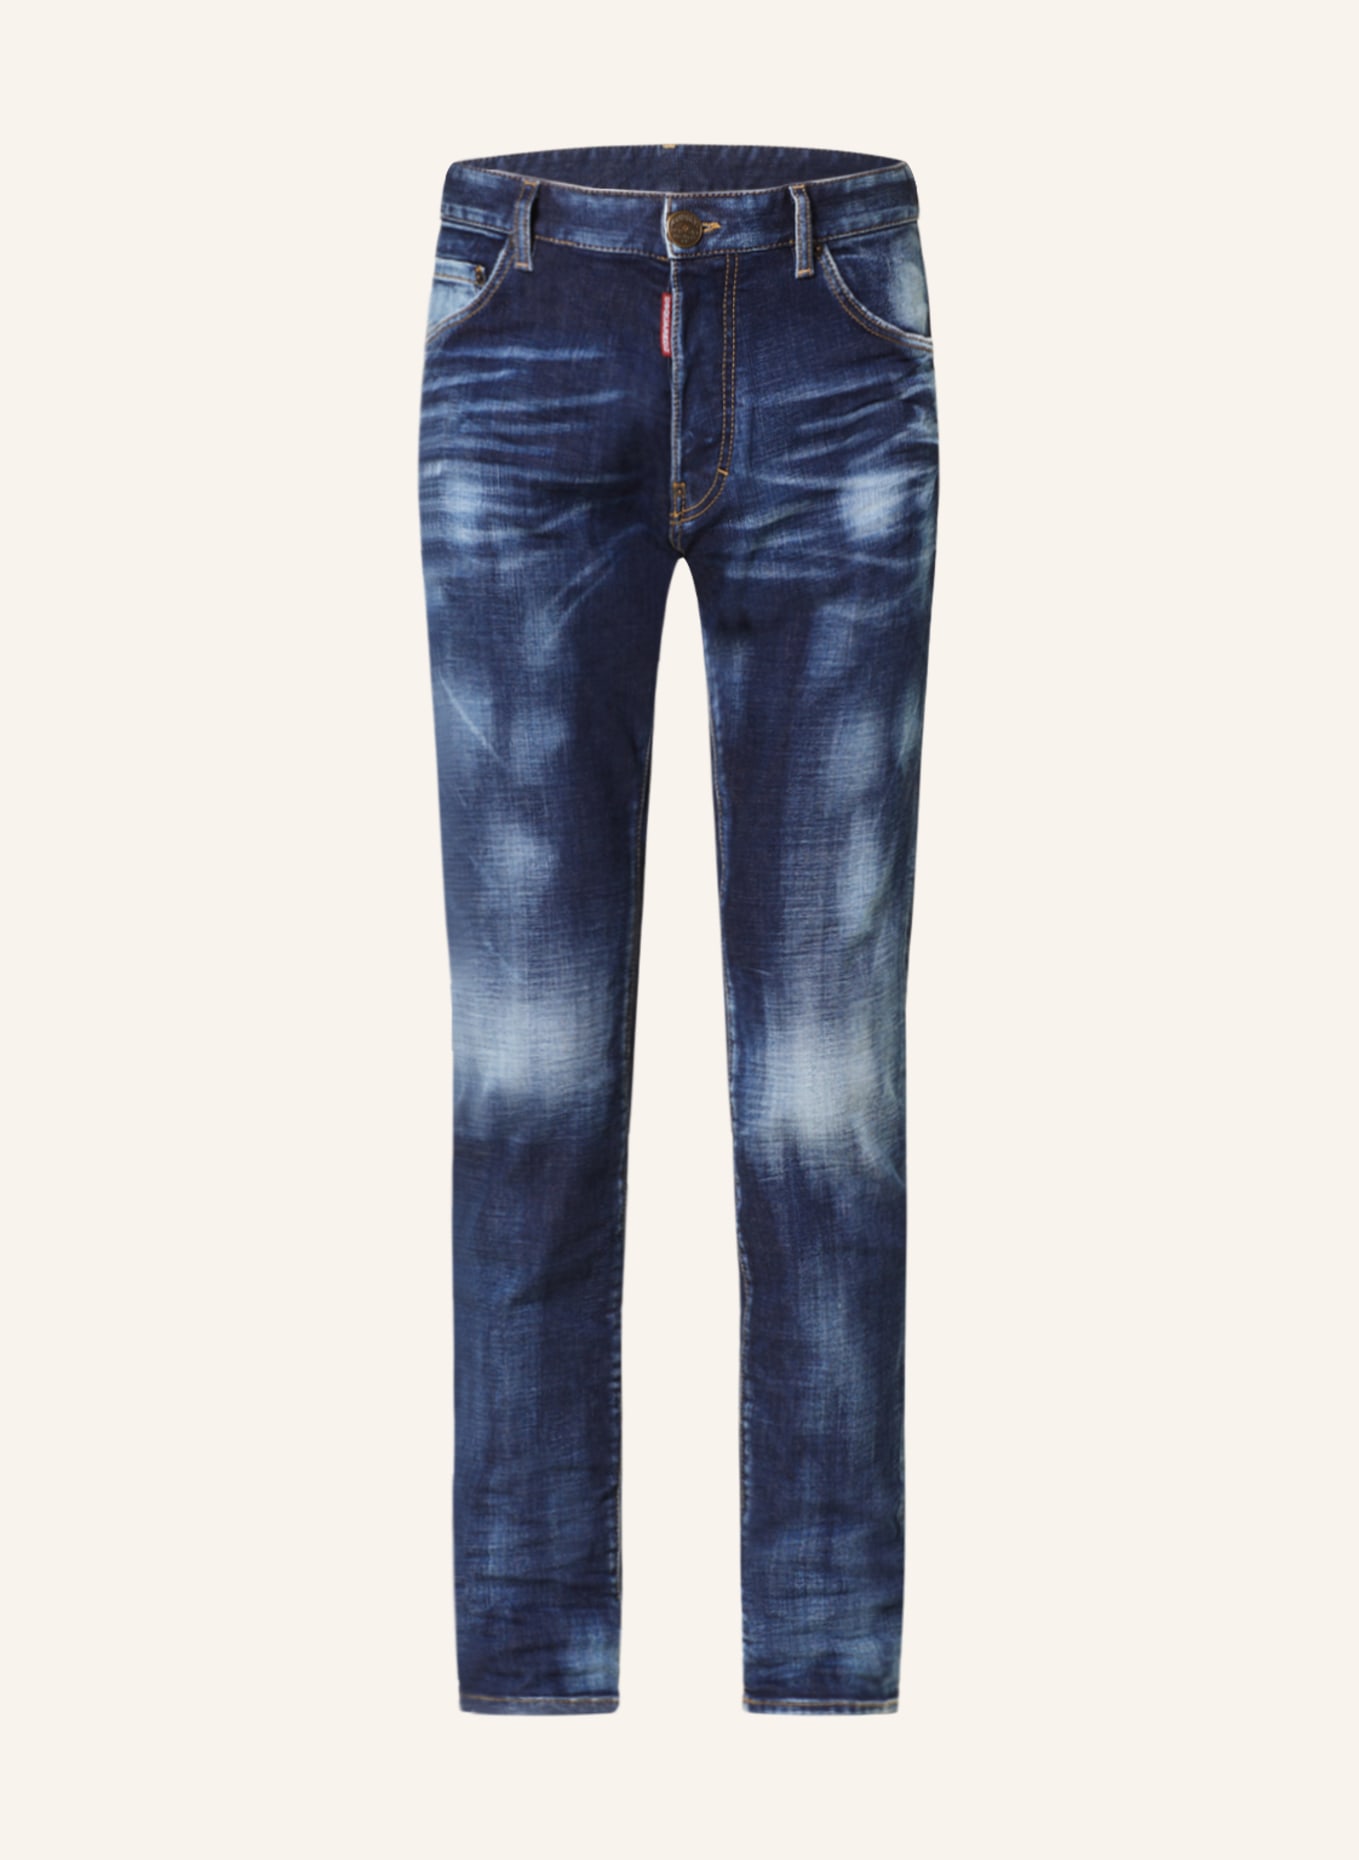 DSQUARED2 Jeans COOL GUY Slim Fit, Farbe: 470 NAVY BLUE (Bild 1)